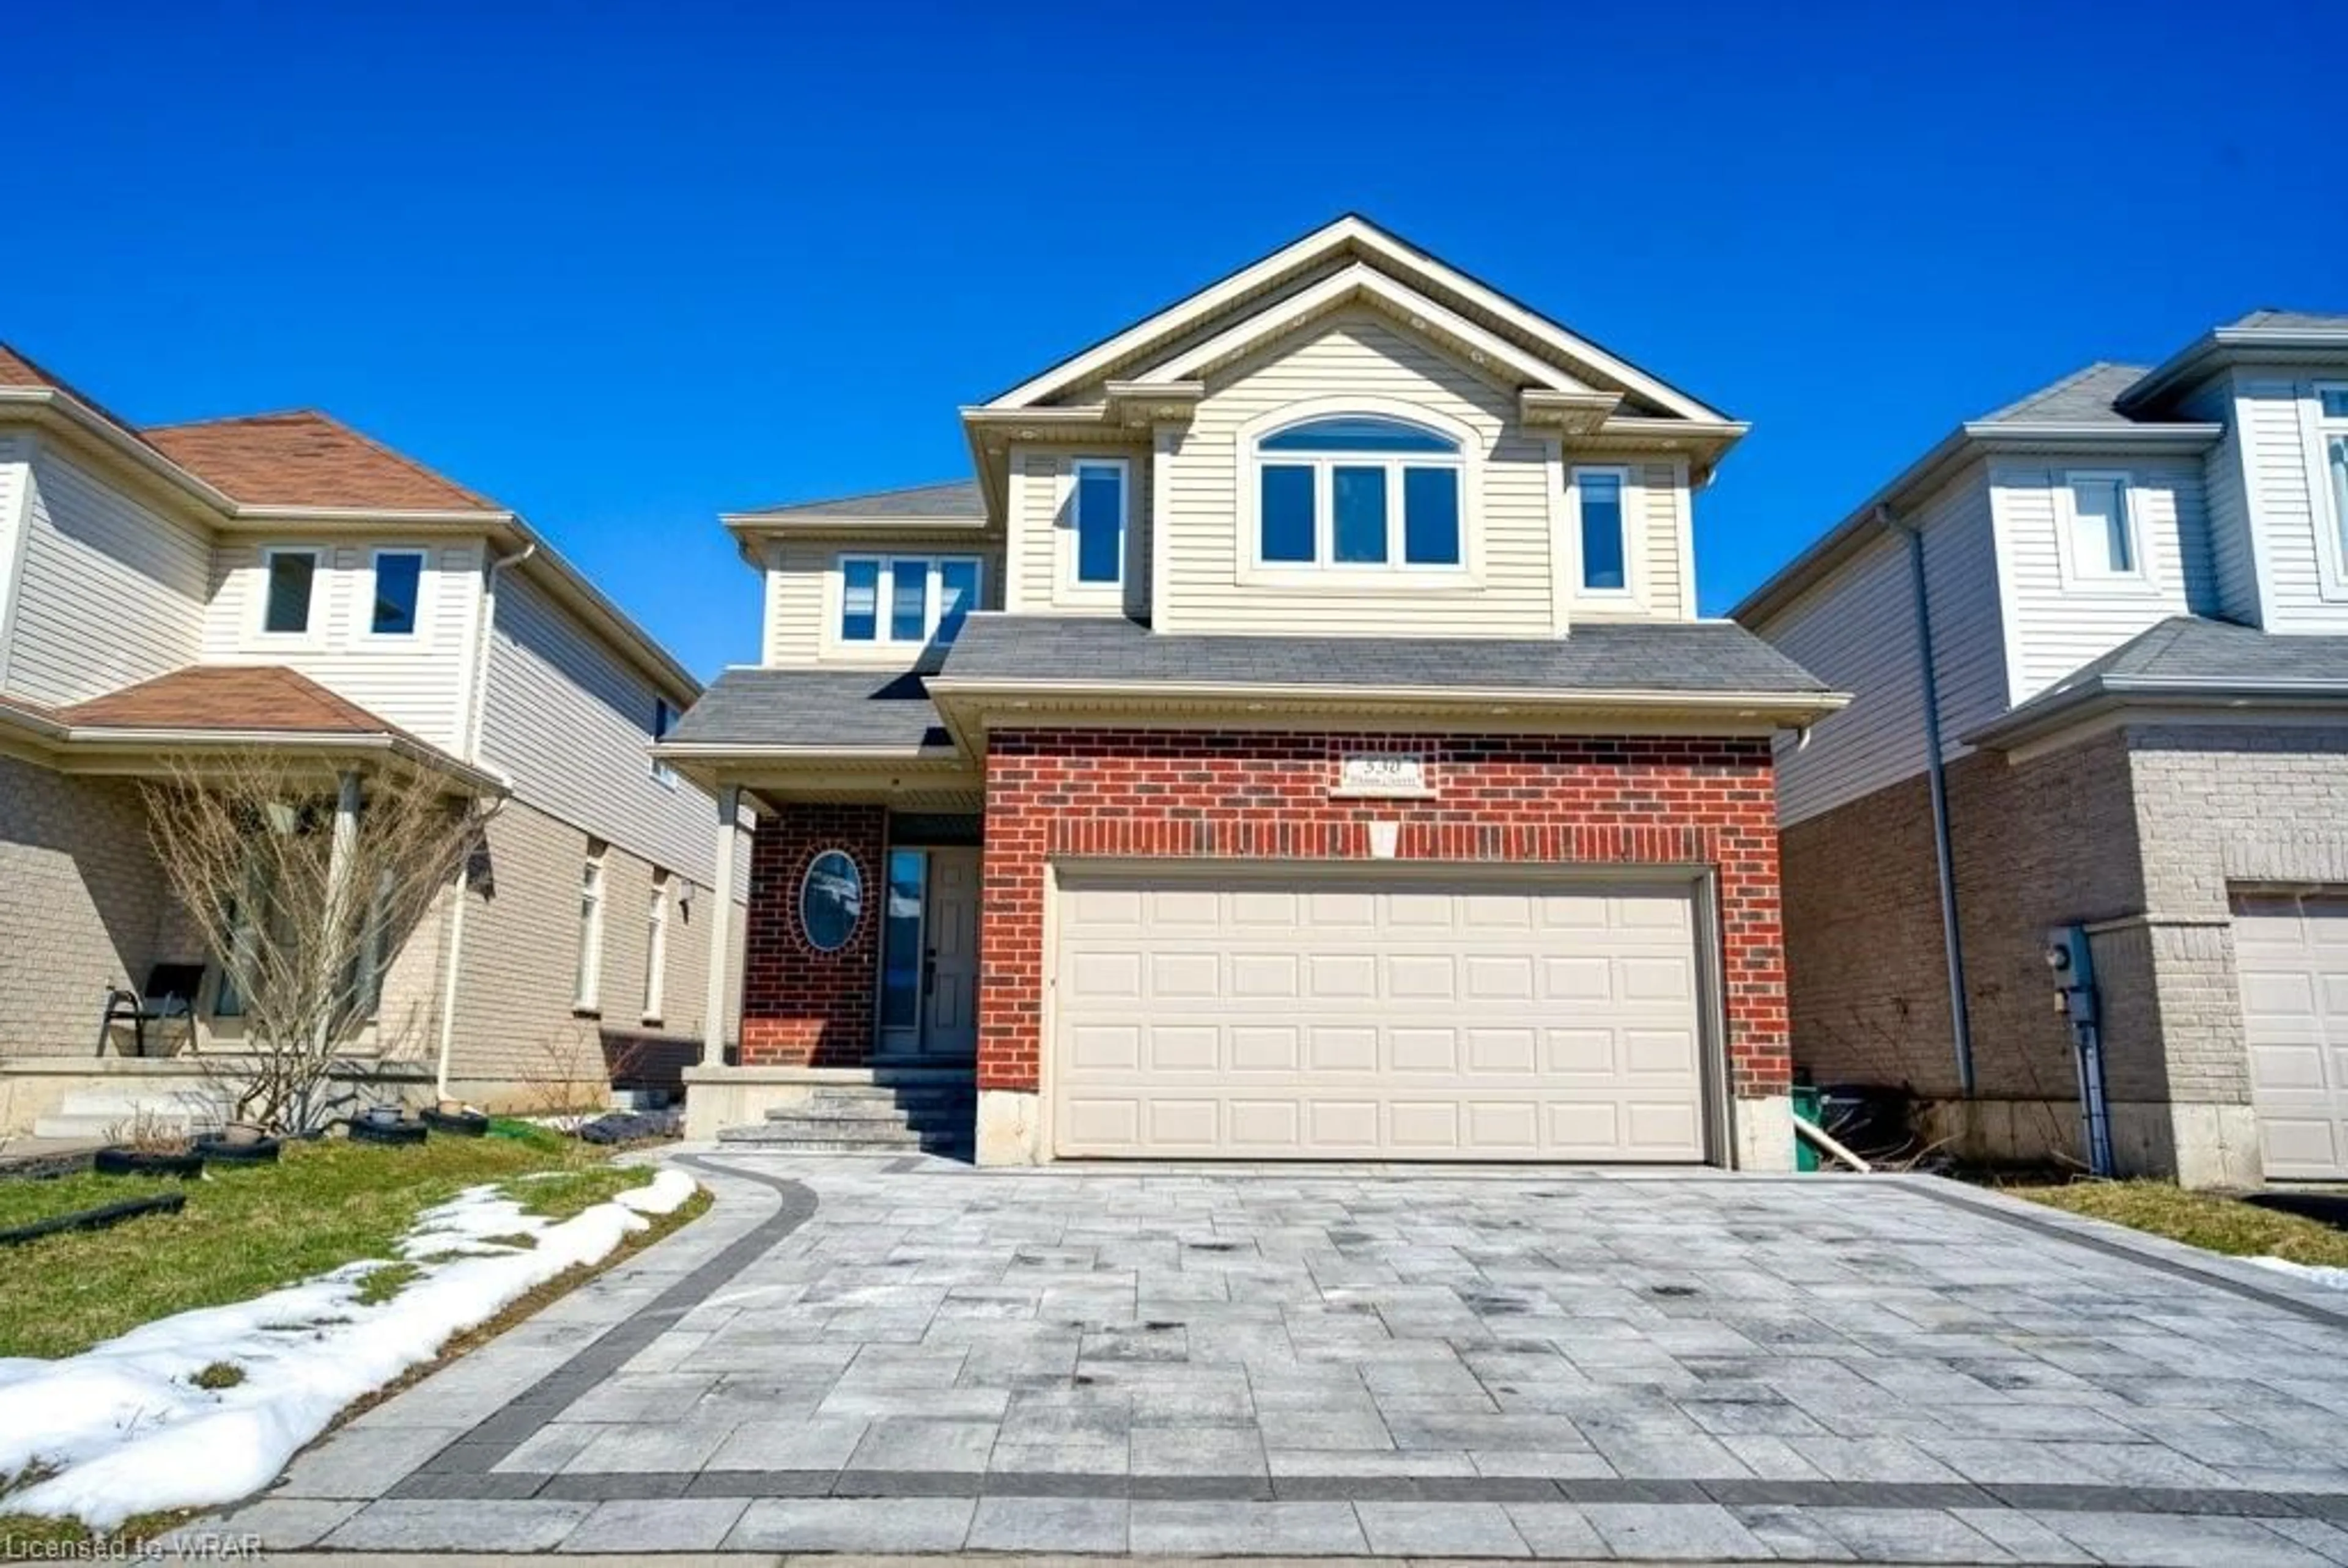 Home with brick exterior material for 530 Wasaga Cres, Waterloo Ontario N2V 2Y8